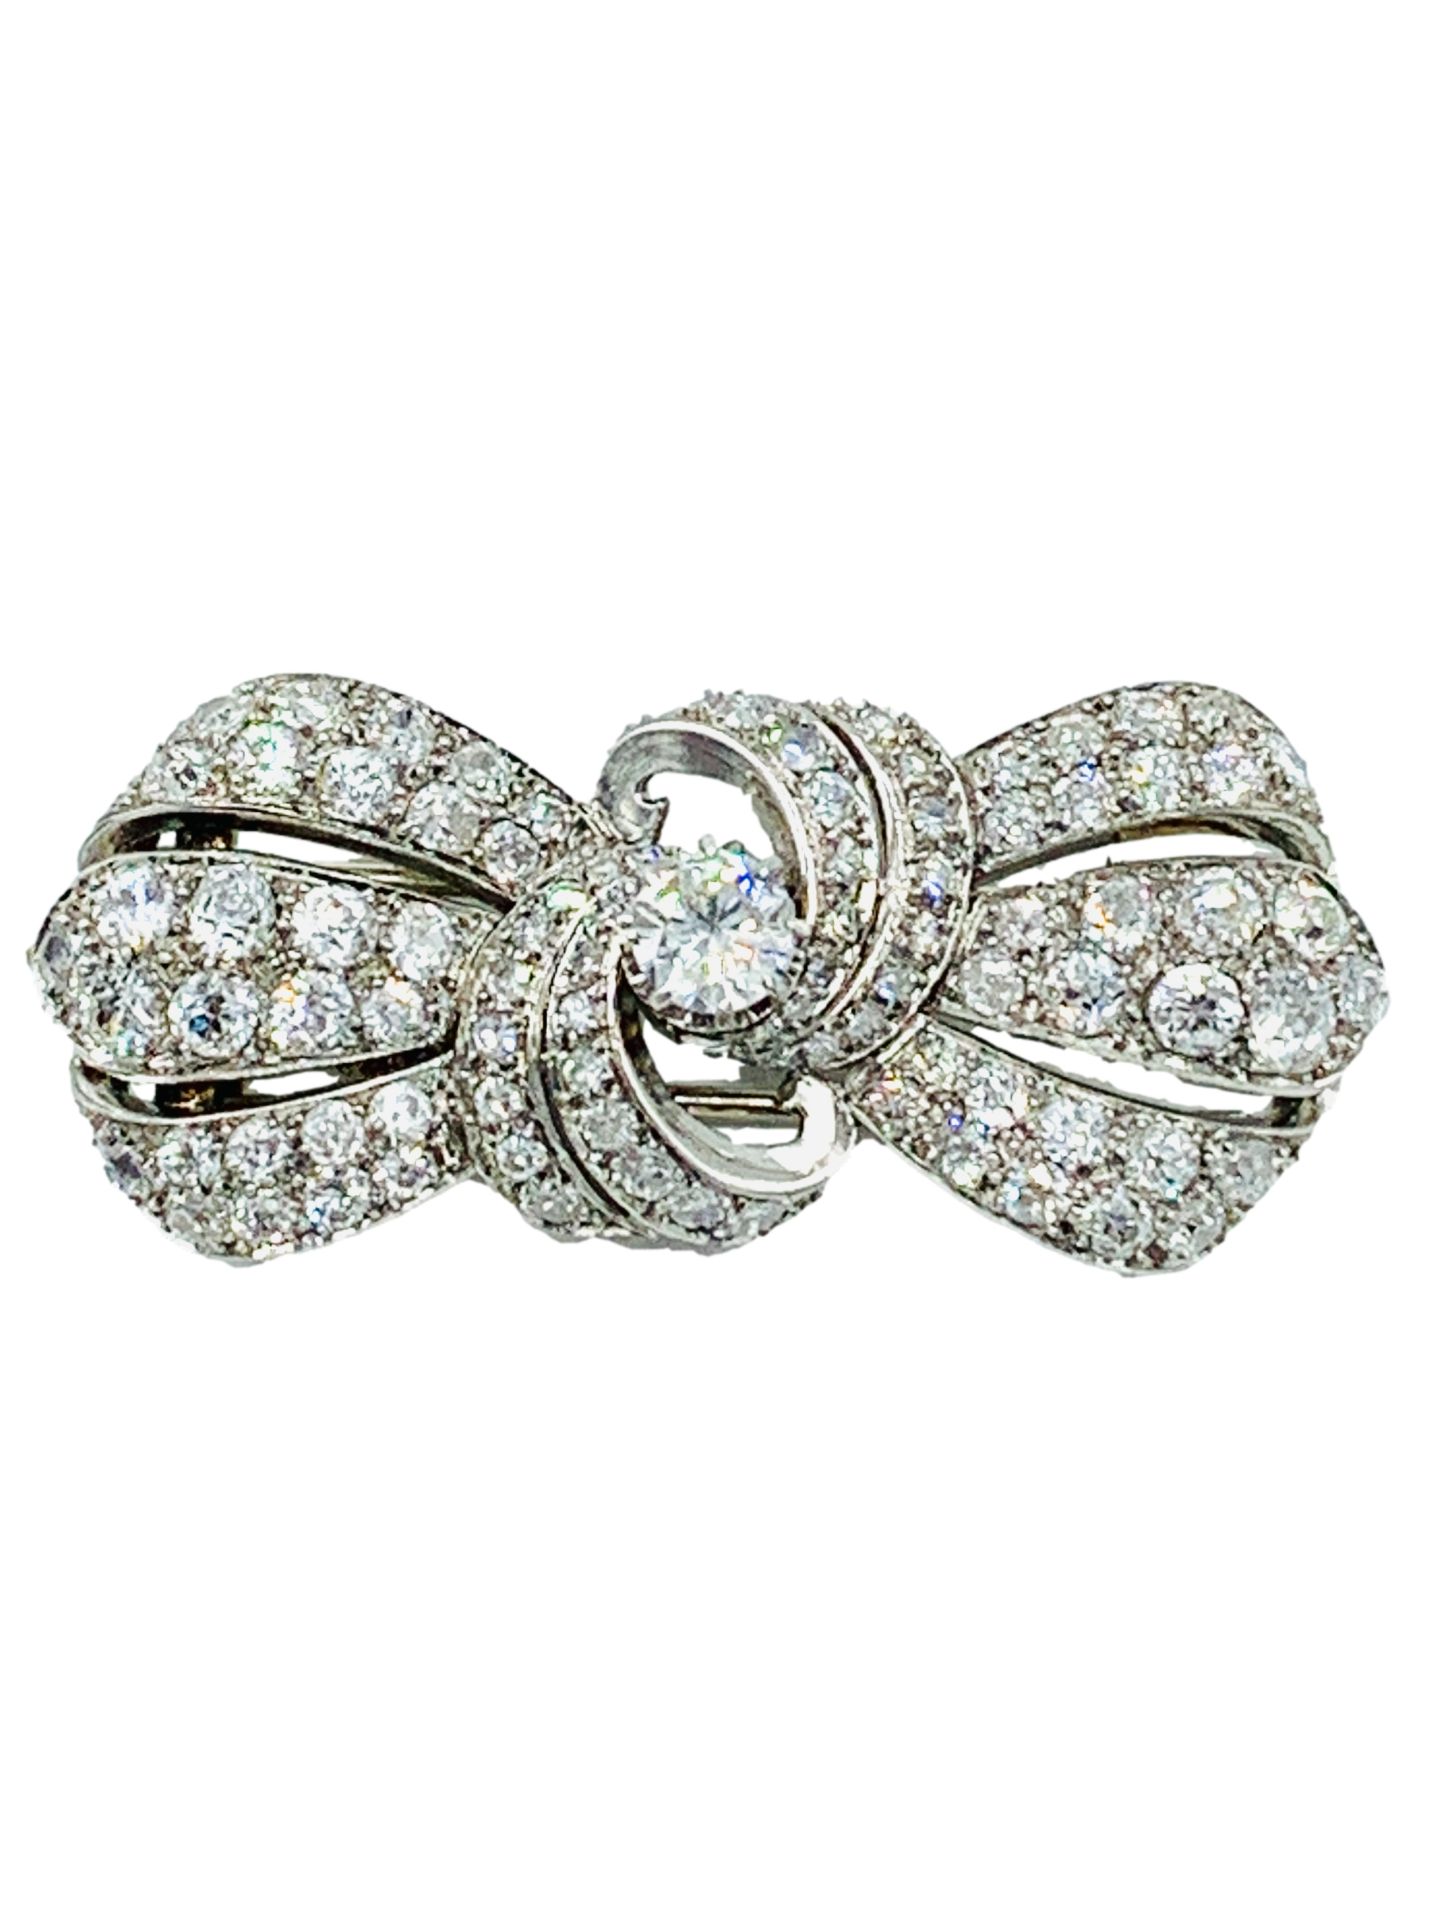 18ct gold and diamond clip brooch, centre stone approximately 1.3ct